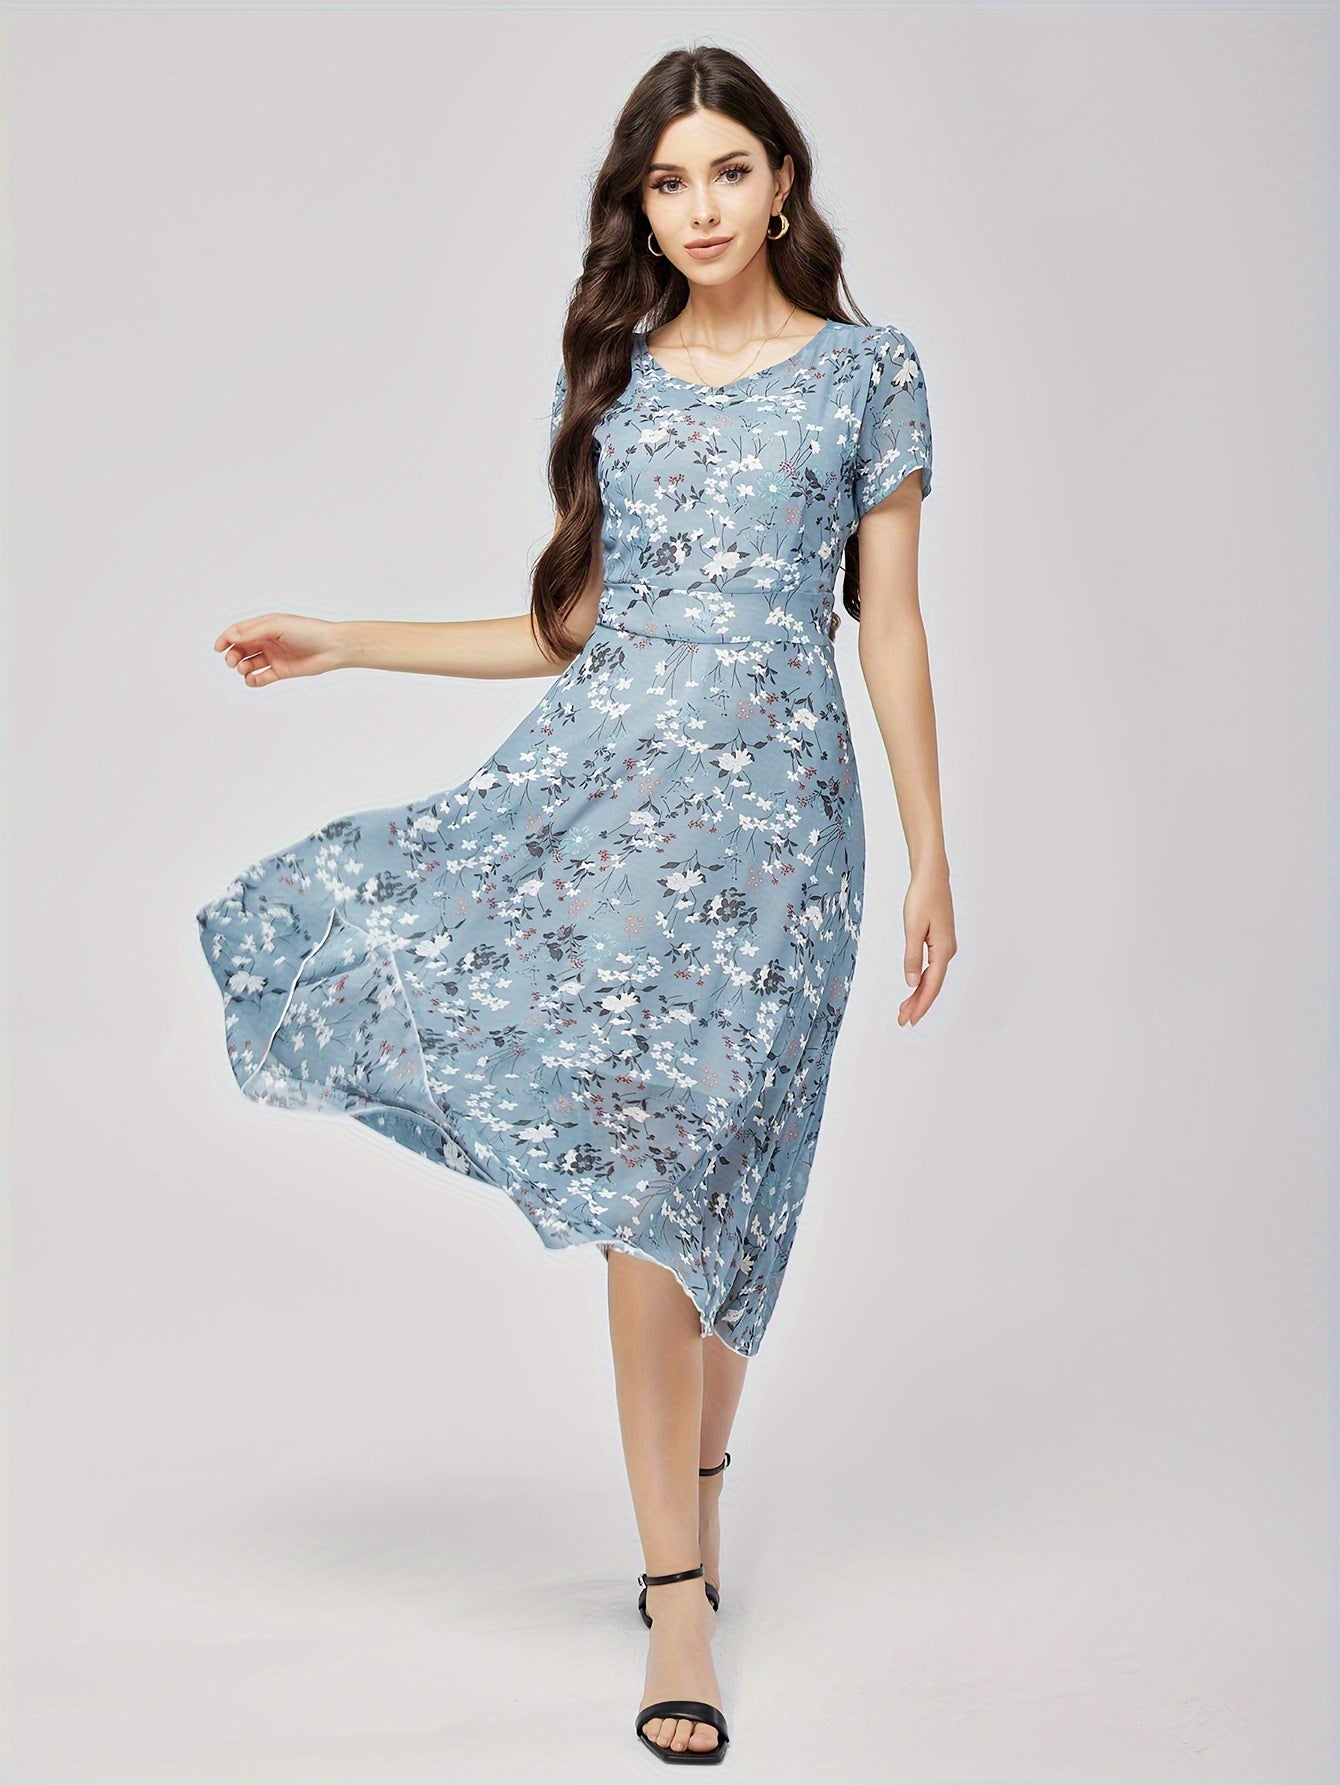 Bohemian Floral Print MIdi Dress, Elegant Short Sleeve Dress For Spring and Summer, Cocktail Party Dress